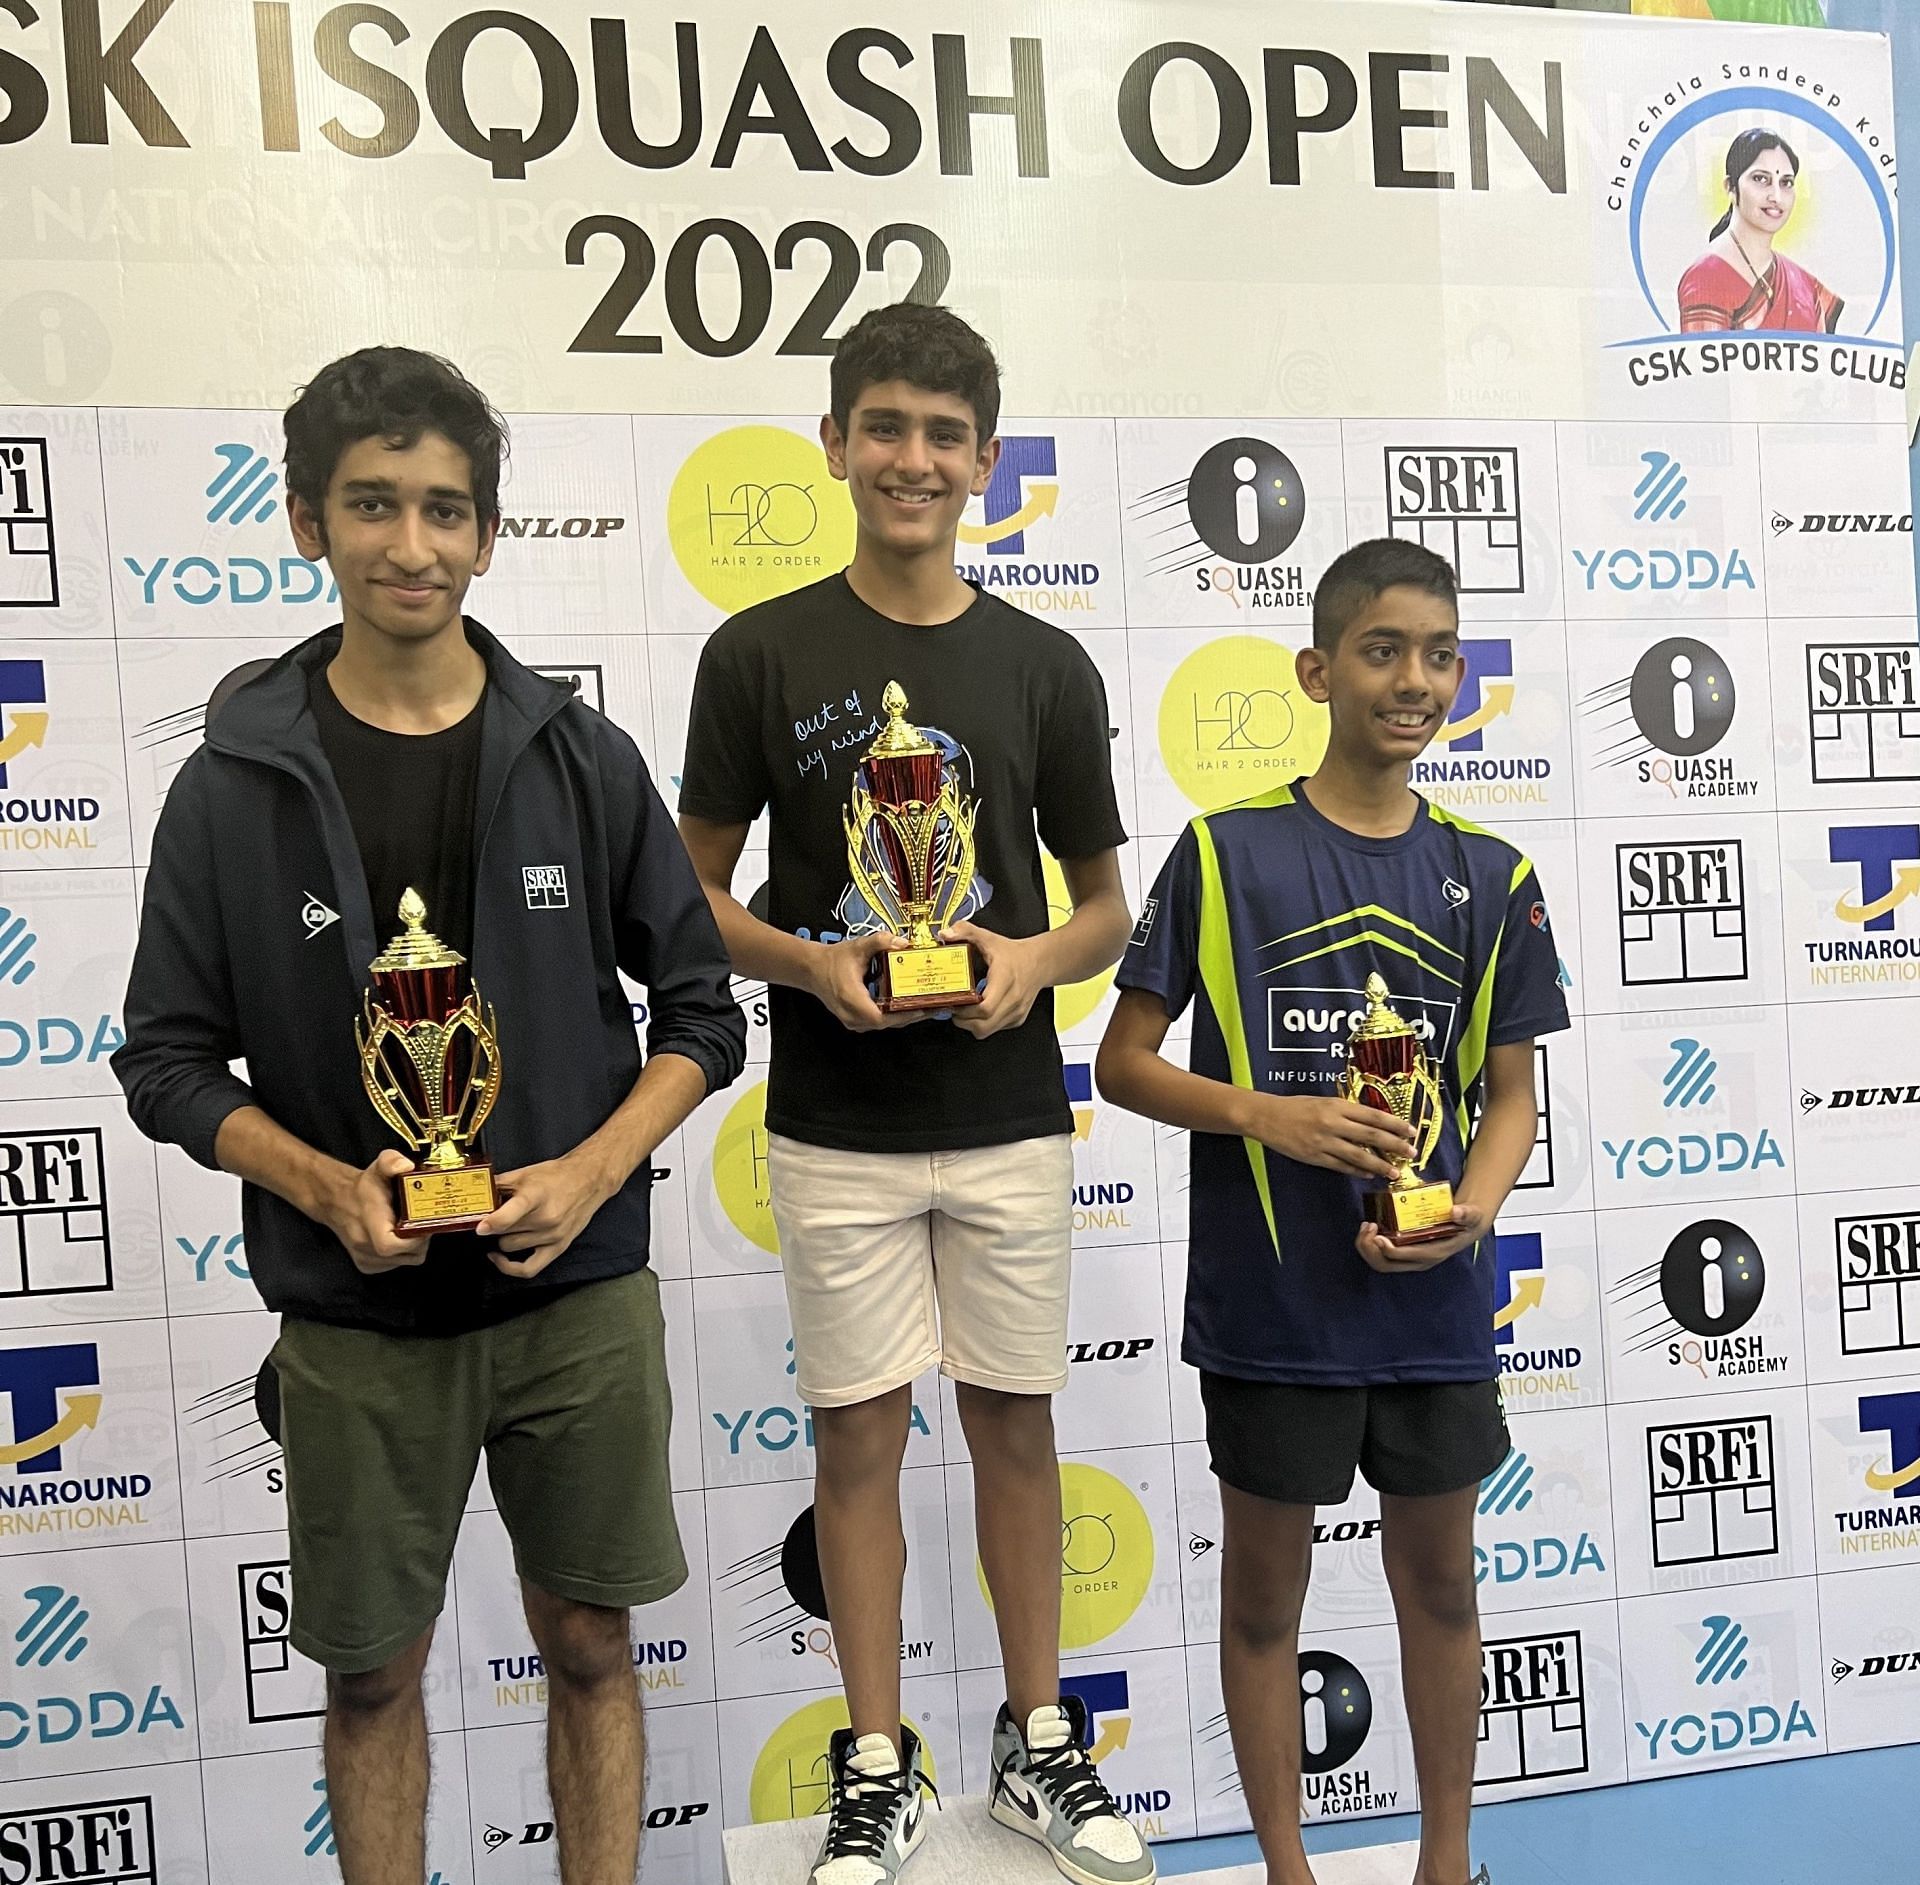 14-year-old Dev Sharma (C) of Nagpur beat Vedant Chhedda in the Under-15 CSK iSquash Open final in Pune. (Pic credit: SRFI)